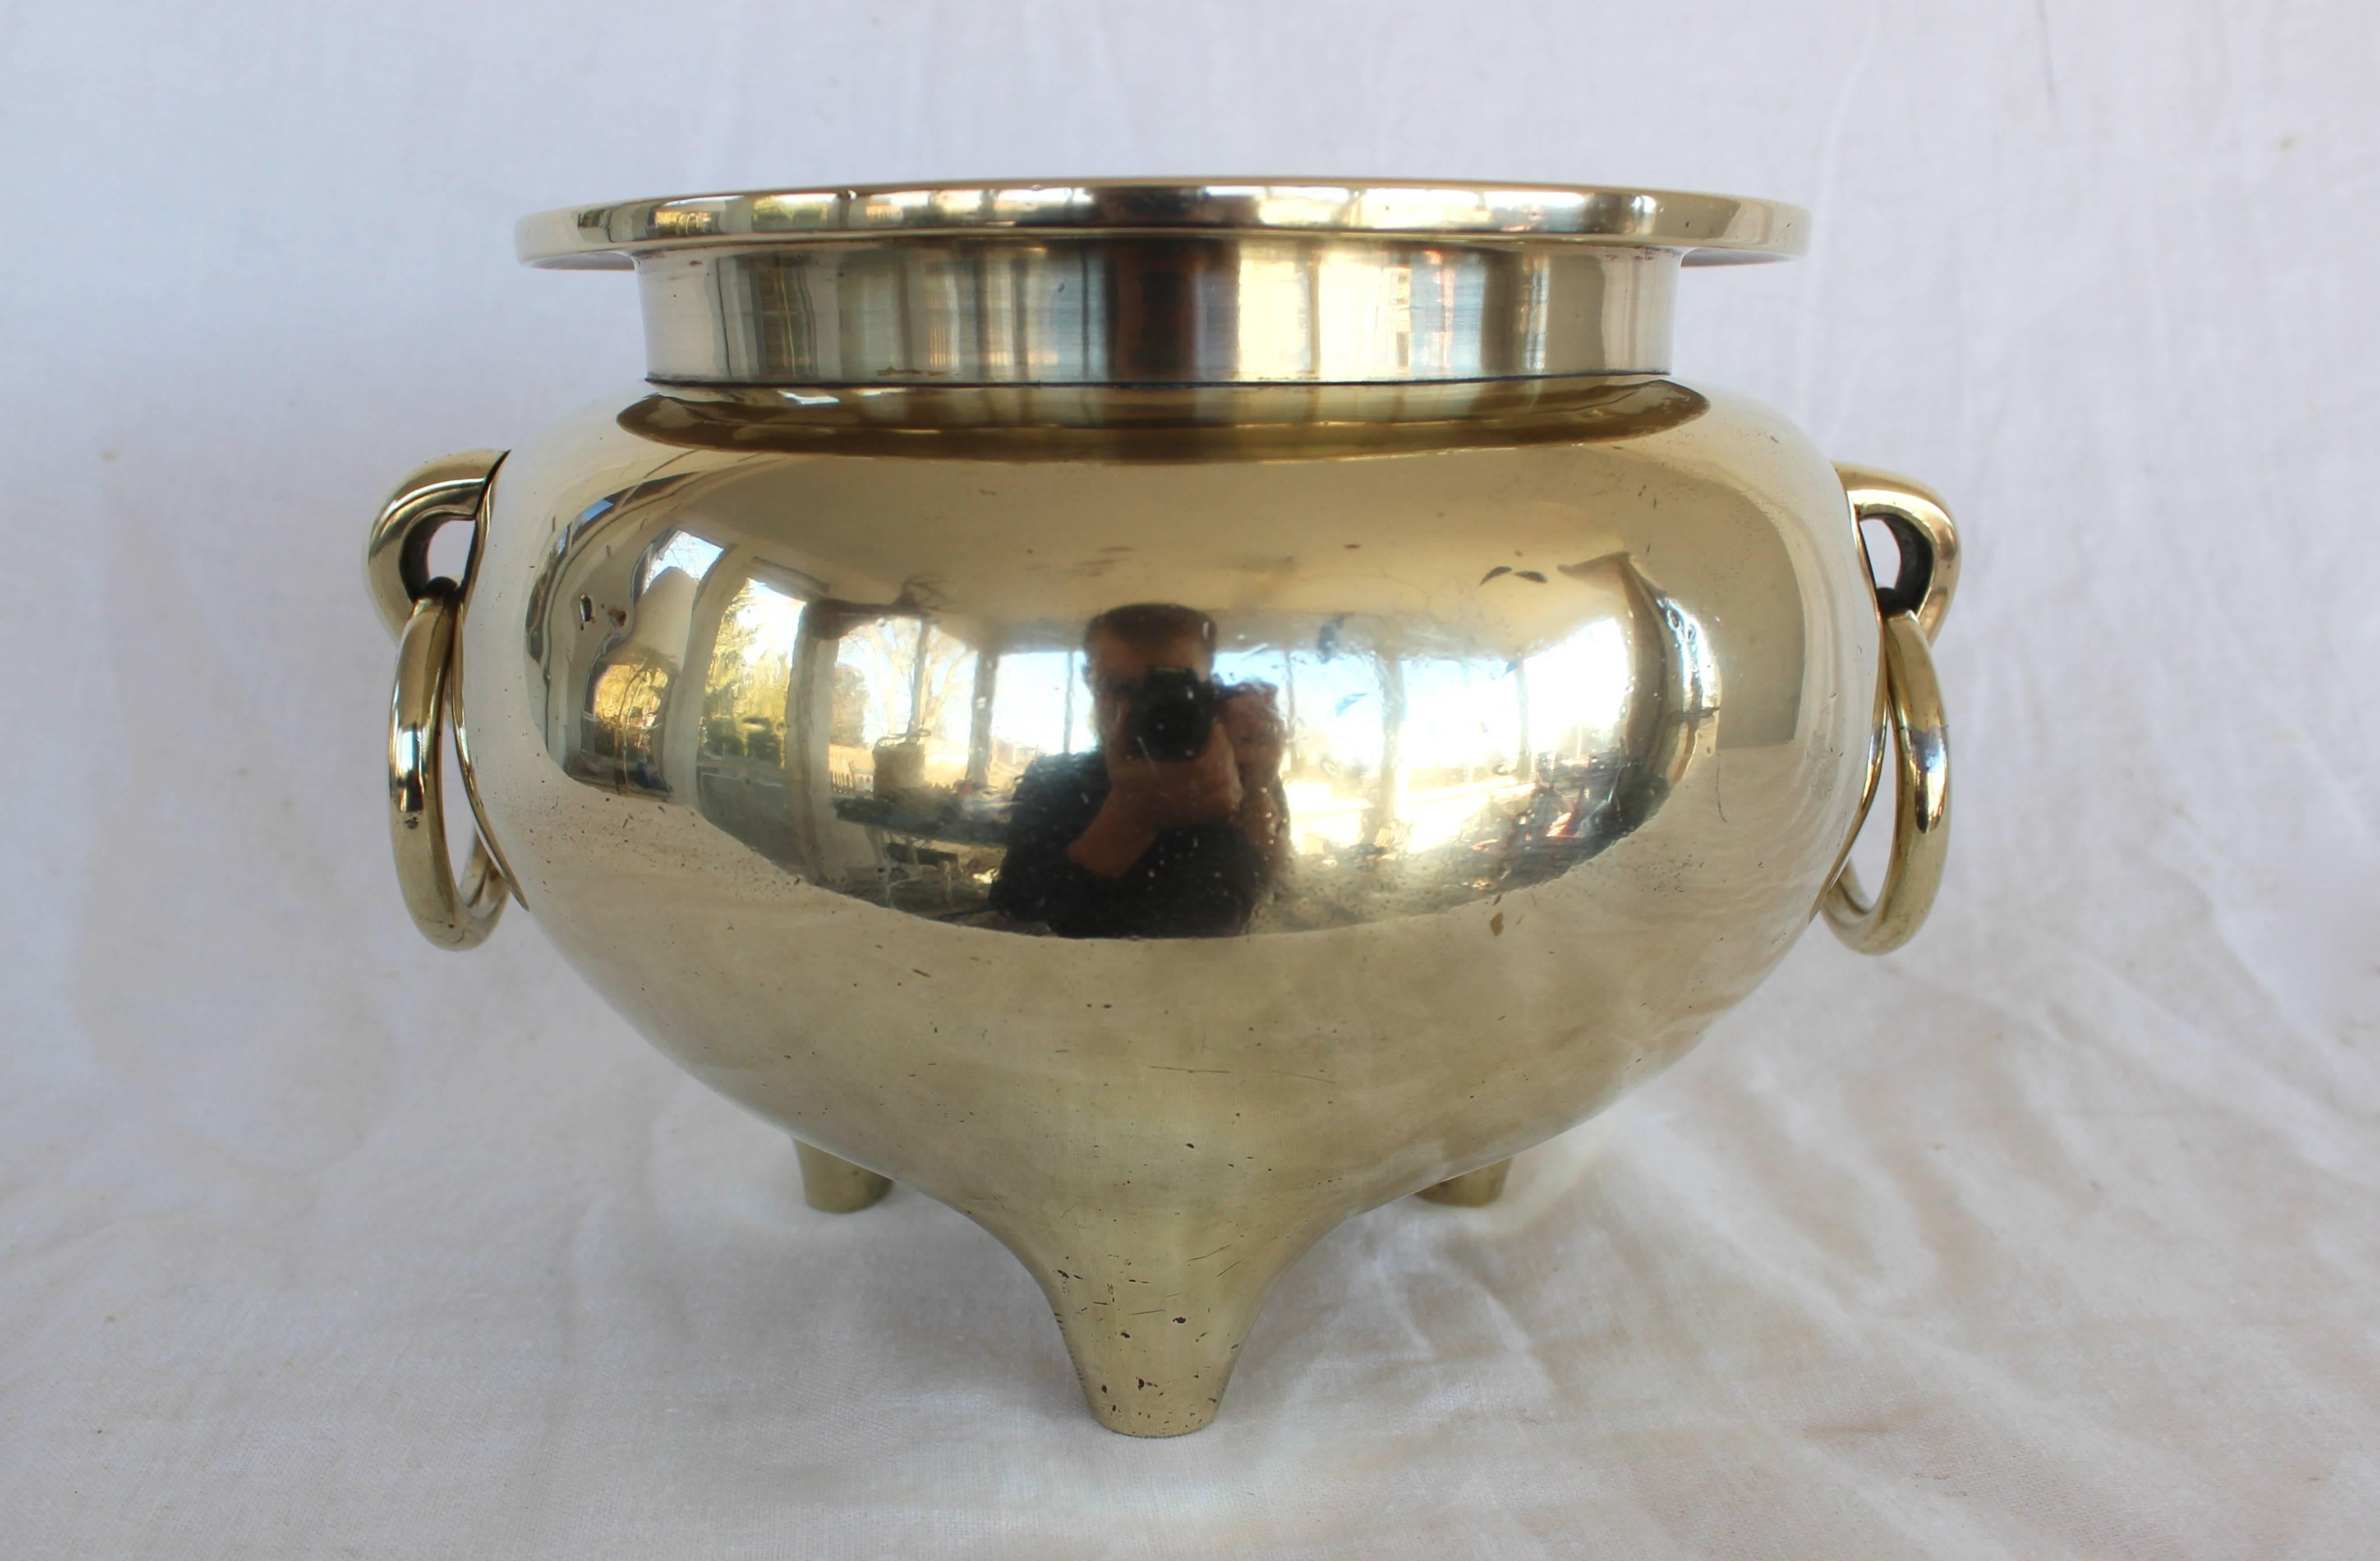 Substantial solid brass cachepot perfect for your beautiful orchid. 8.6 lbs.! Three legs with loose ring handles. Would look at home in both modern and traditional spaces.